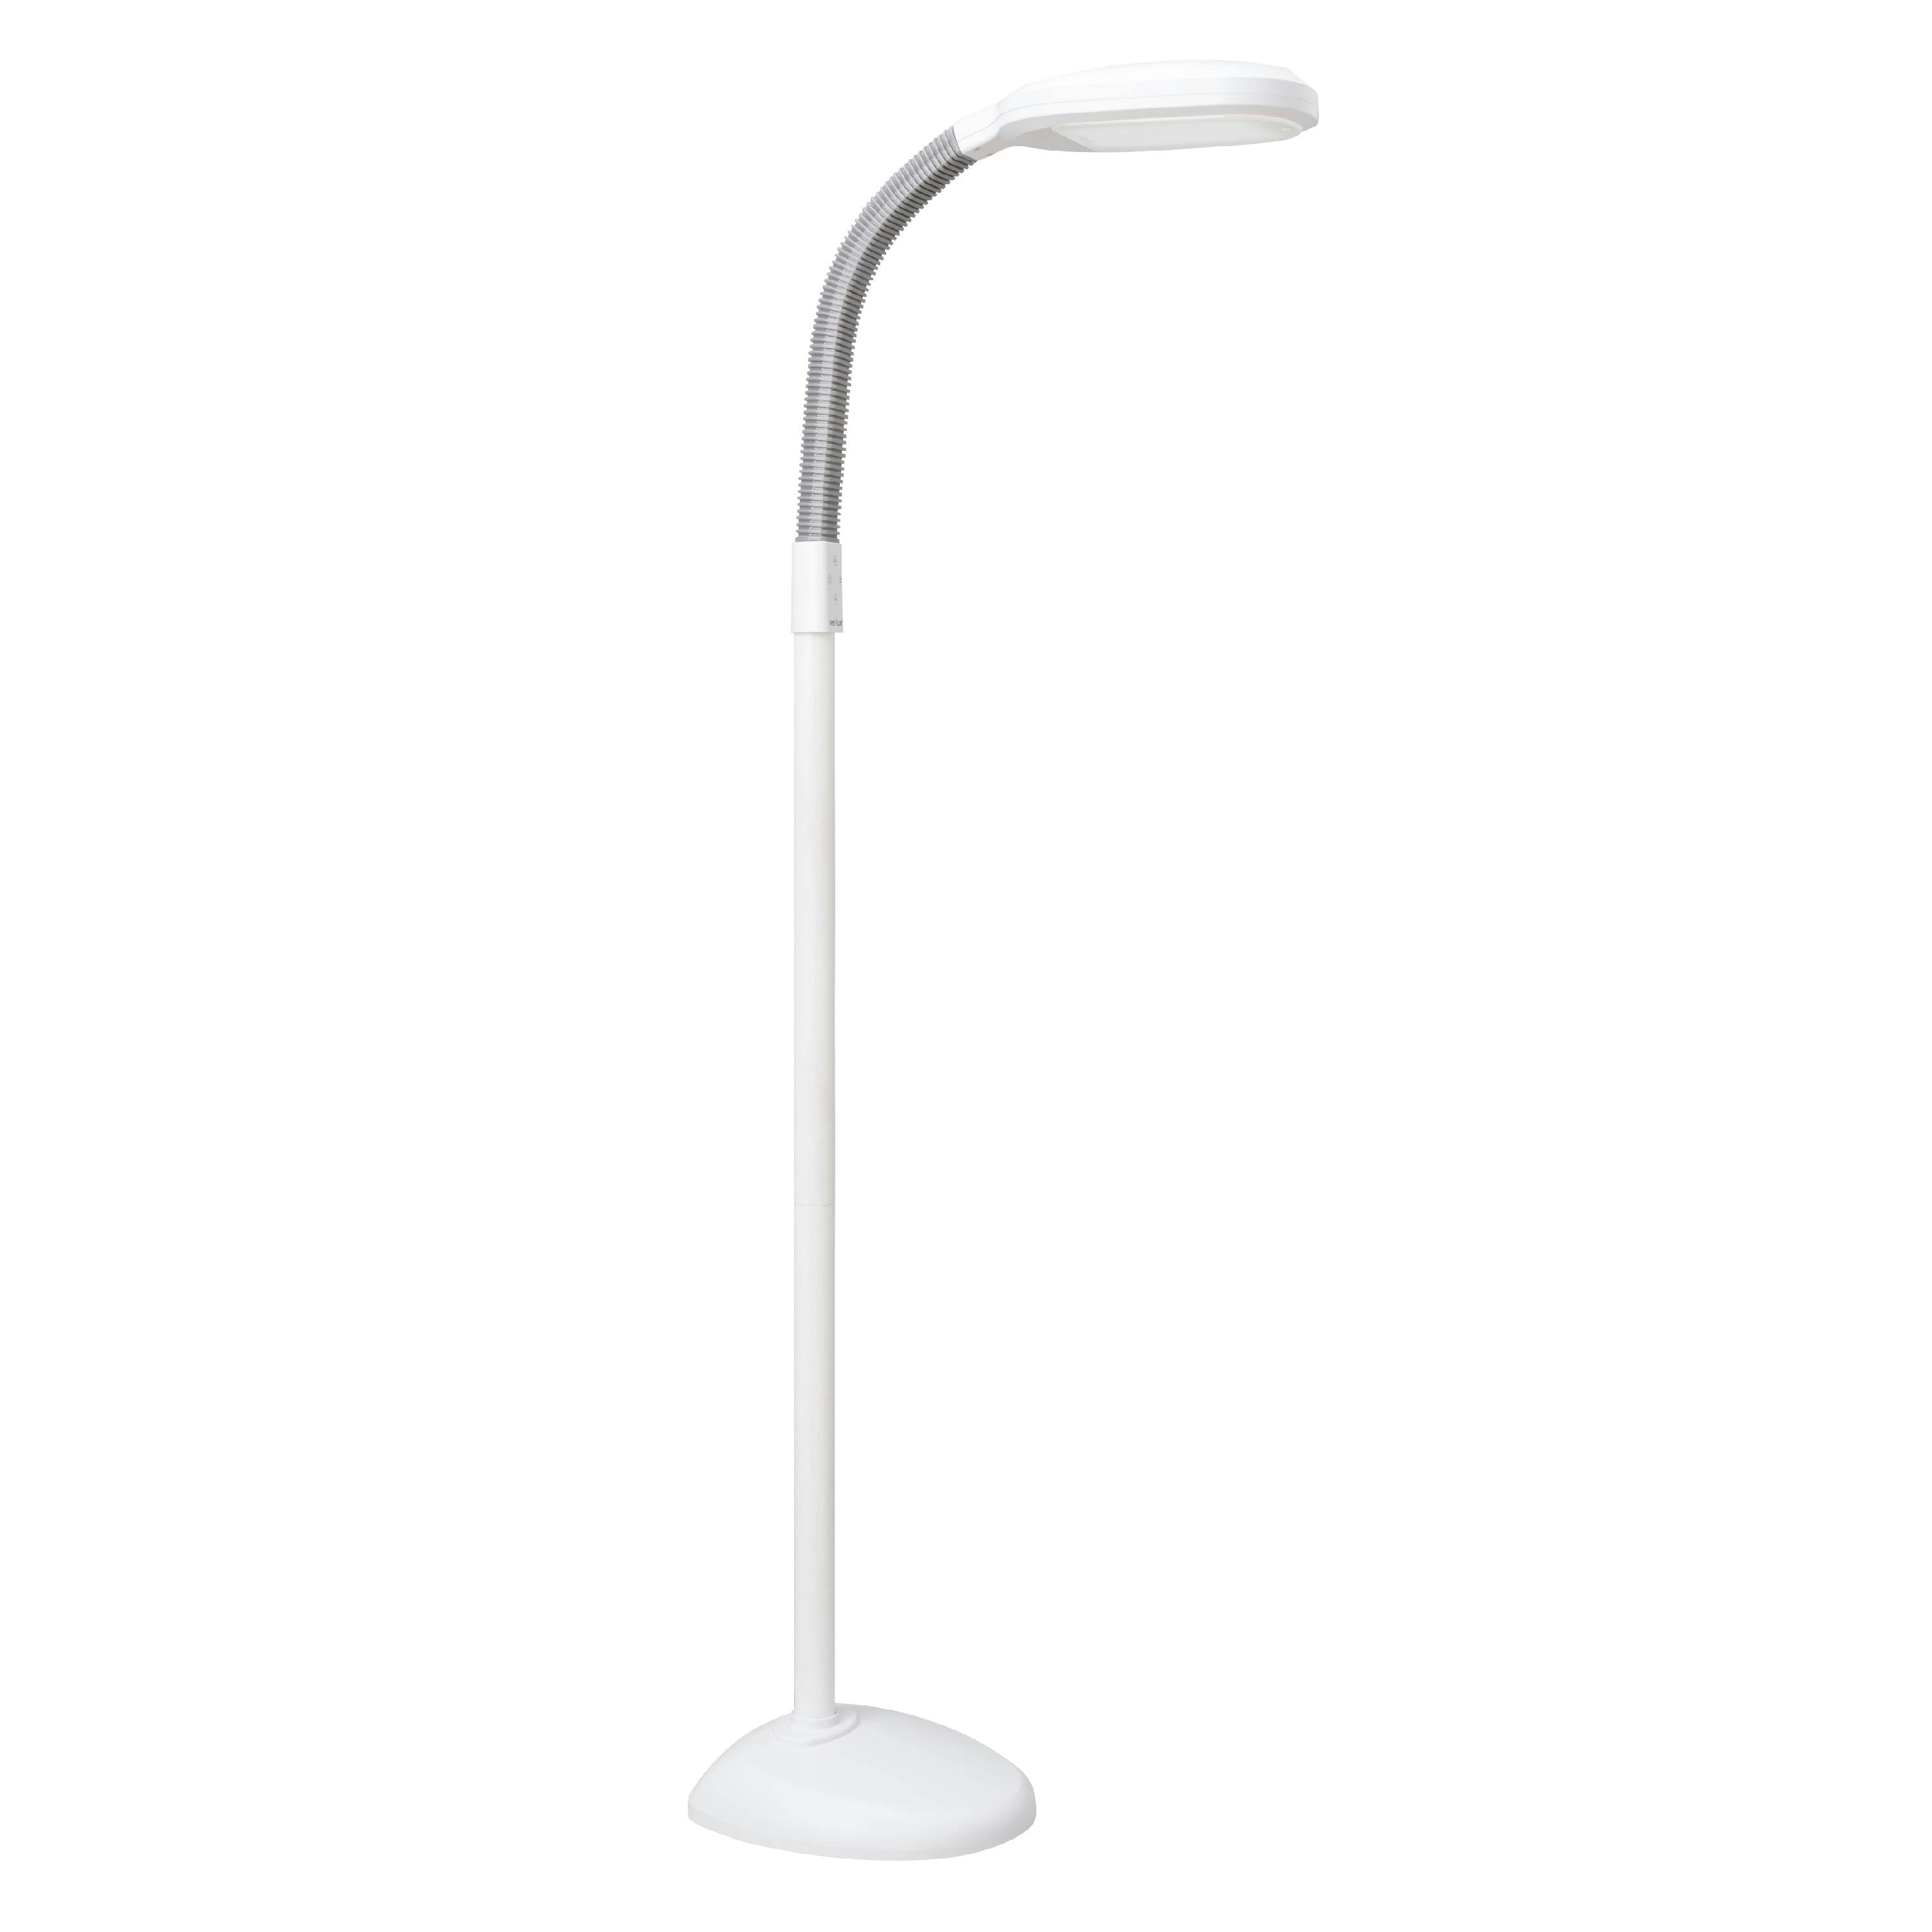 ArcFlex 20" Adjustable White LED Floor Lamp with Touch Control